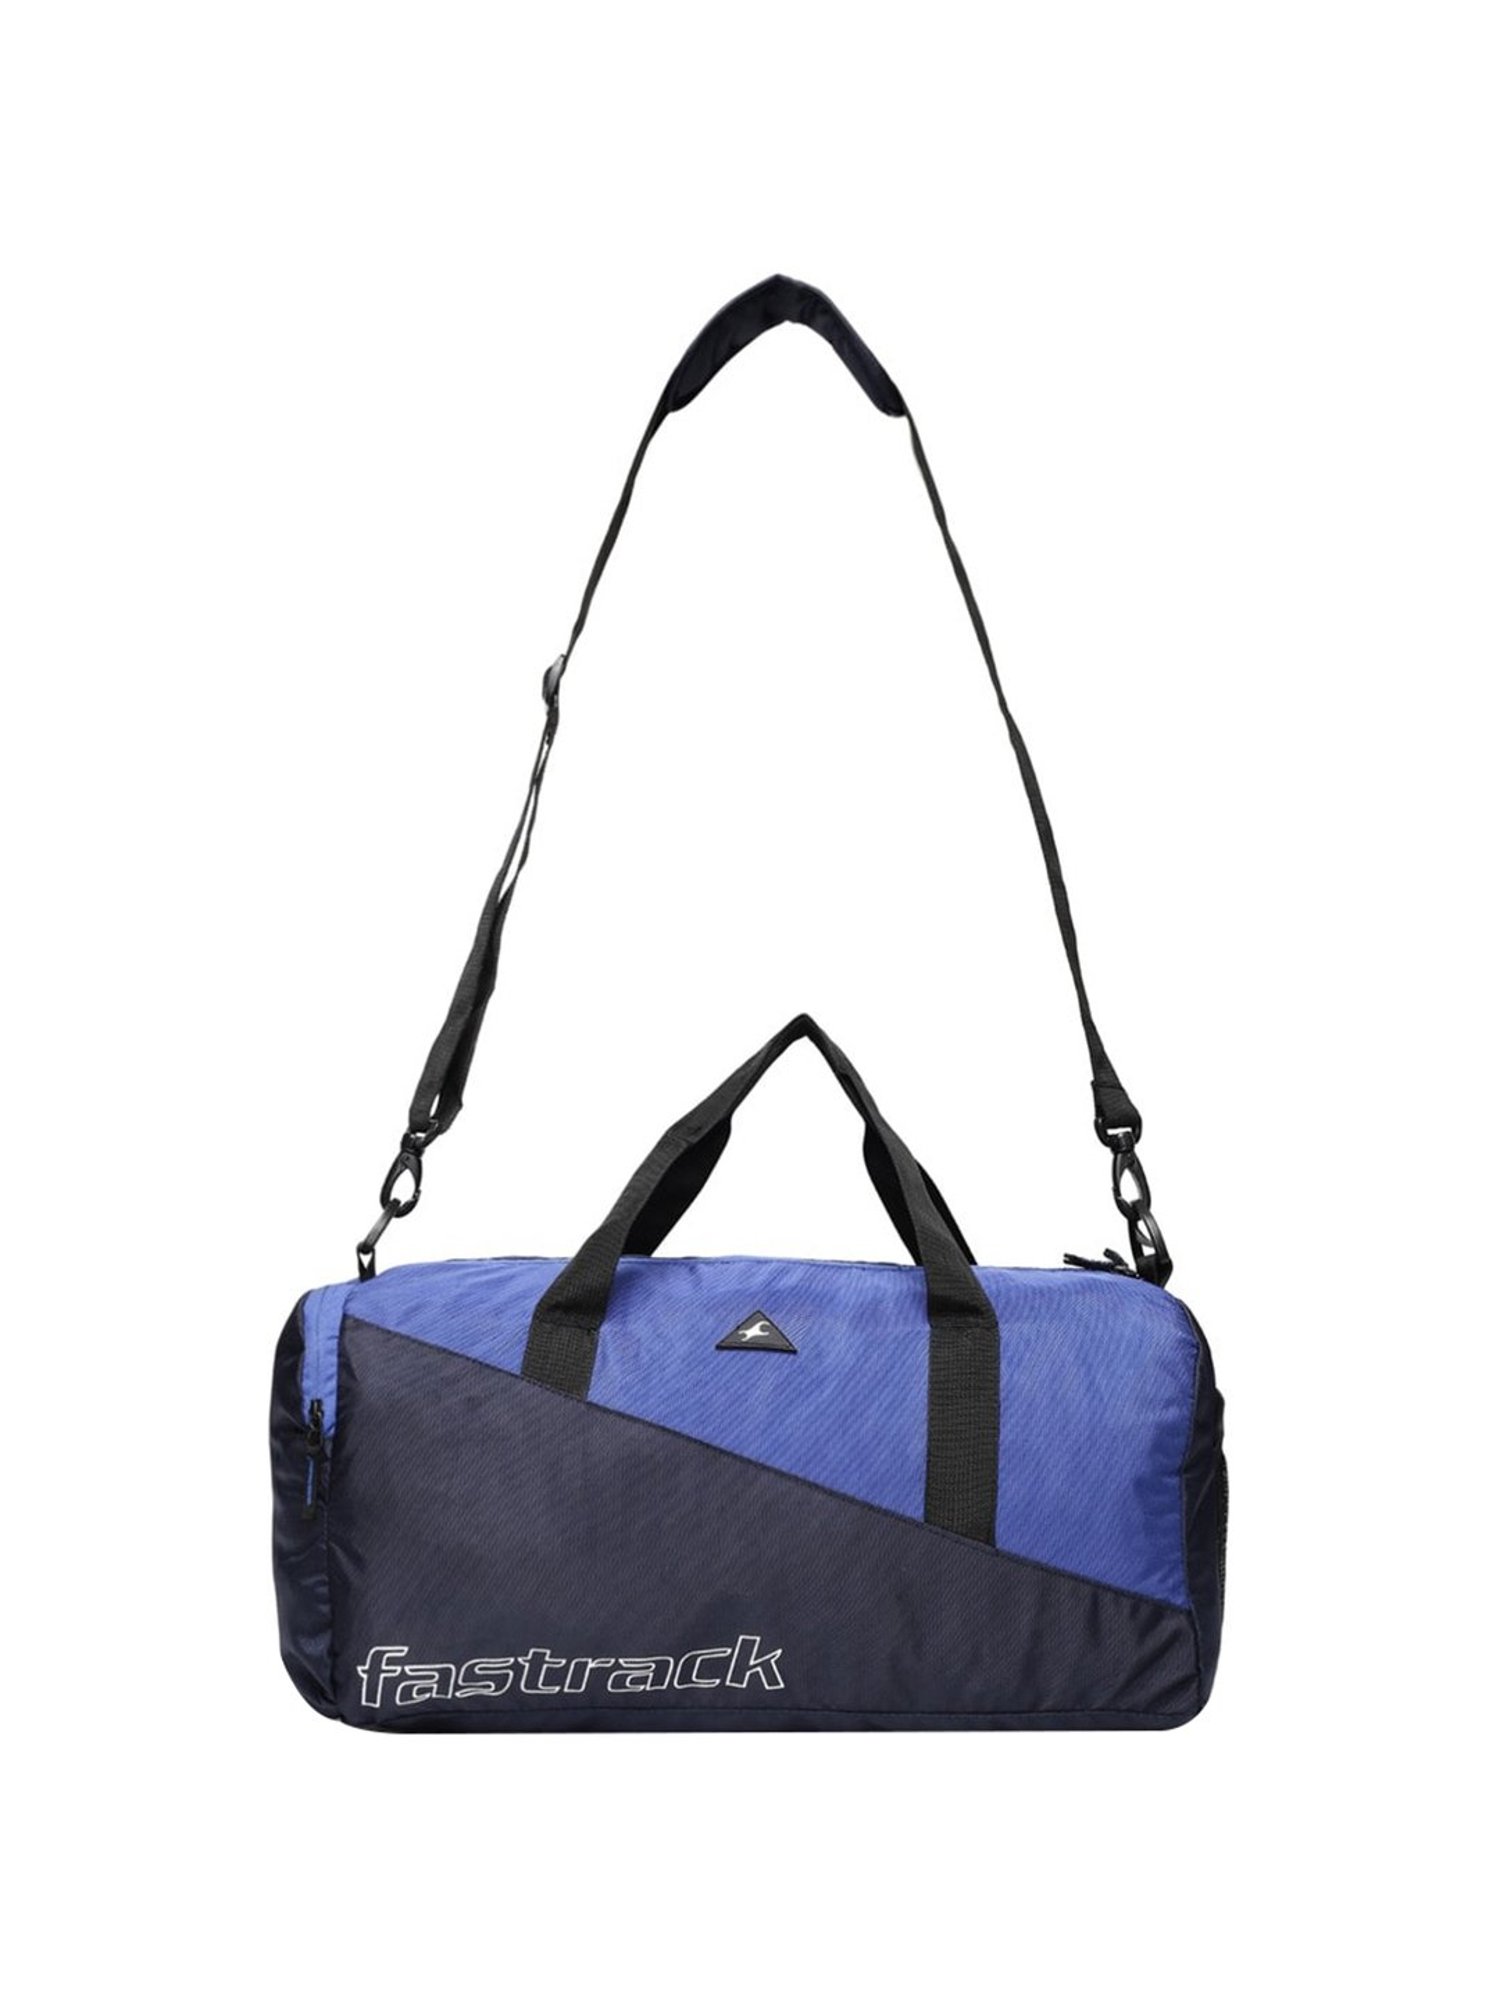 Escape It All 30L Recycled Duffle Bag  NavyBurgundy  Passenger